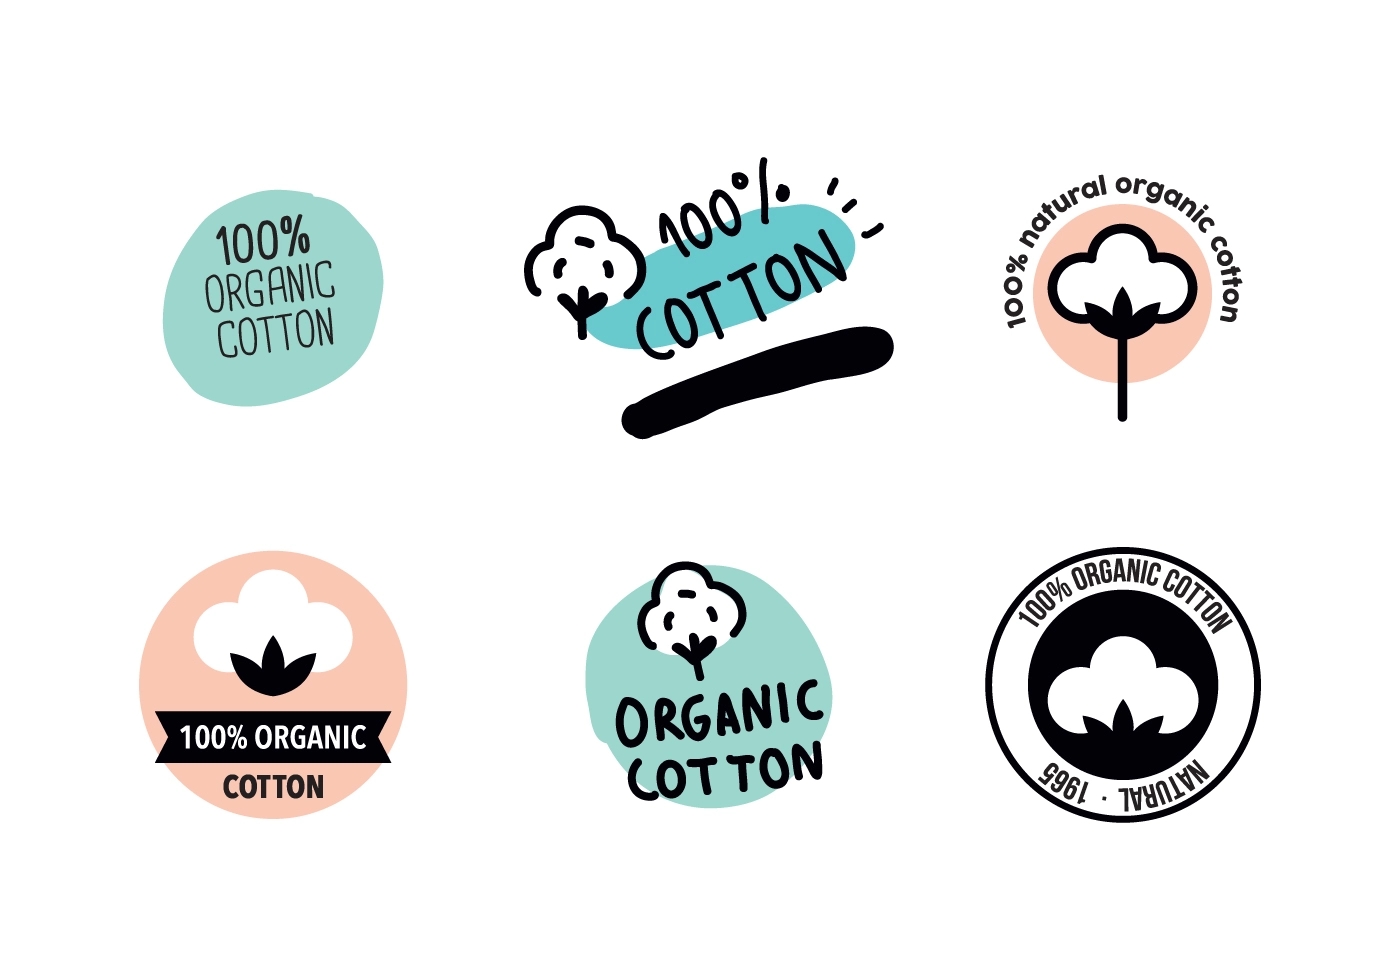 News - What Is Organic Cotton?